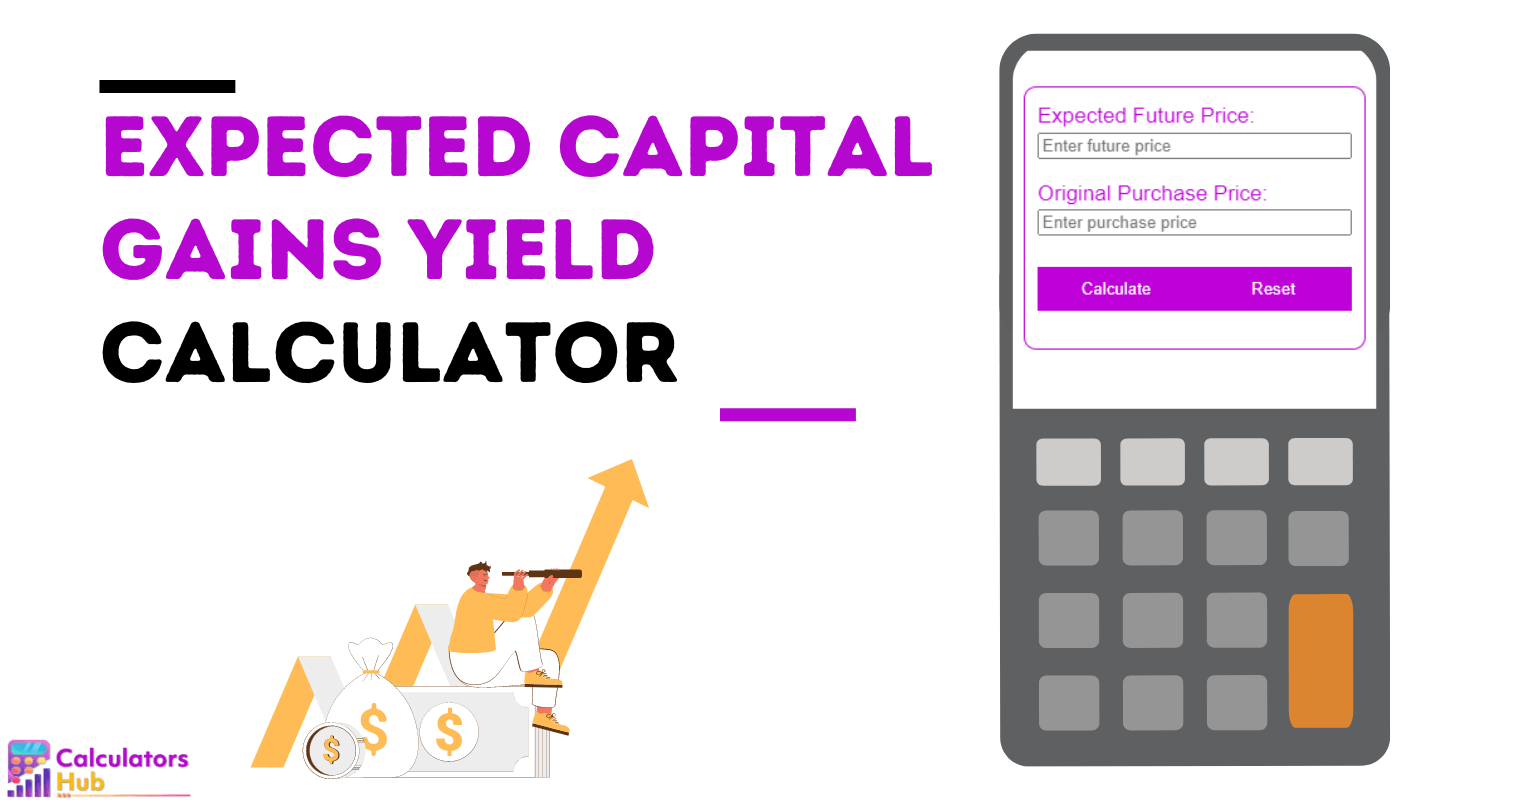 Expected Capital Gains Yield Calculator